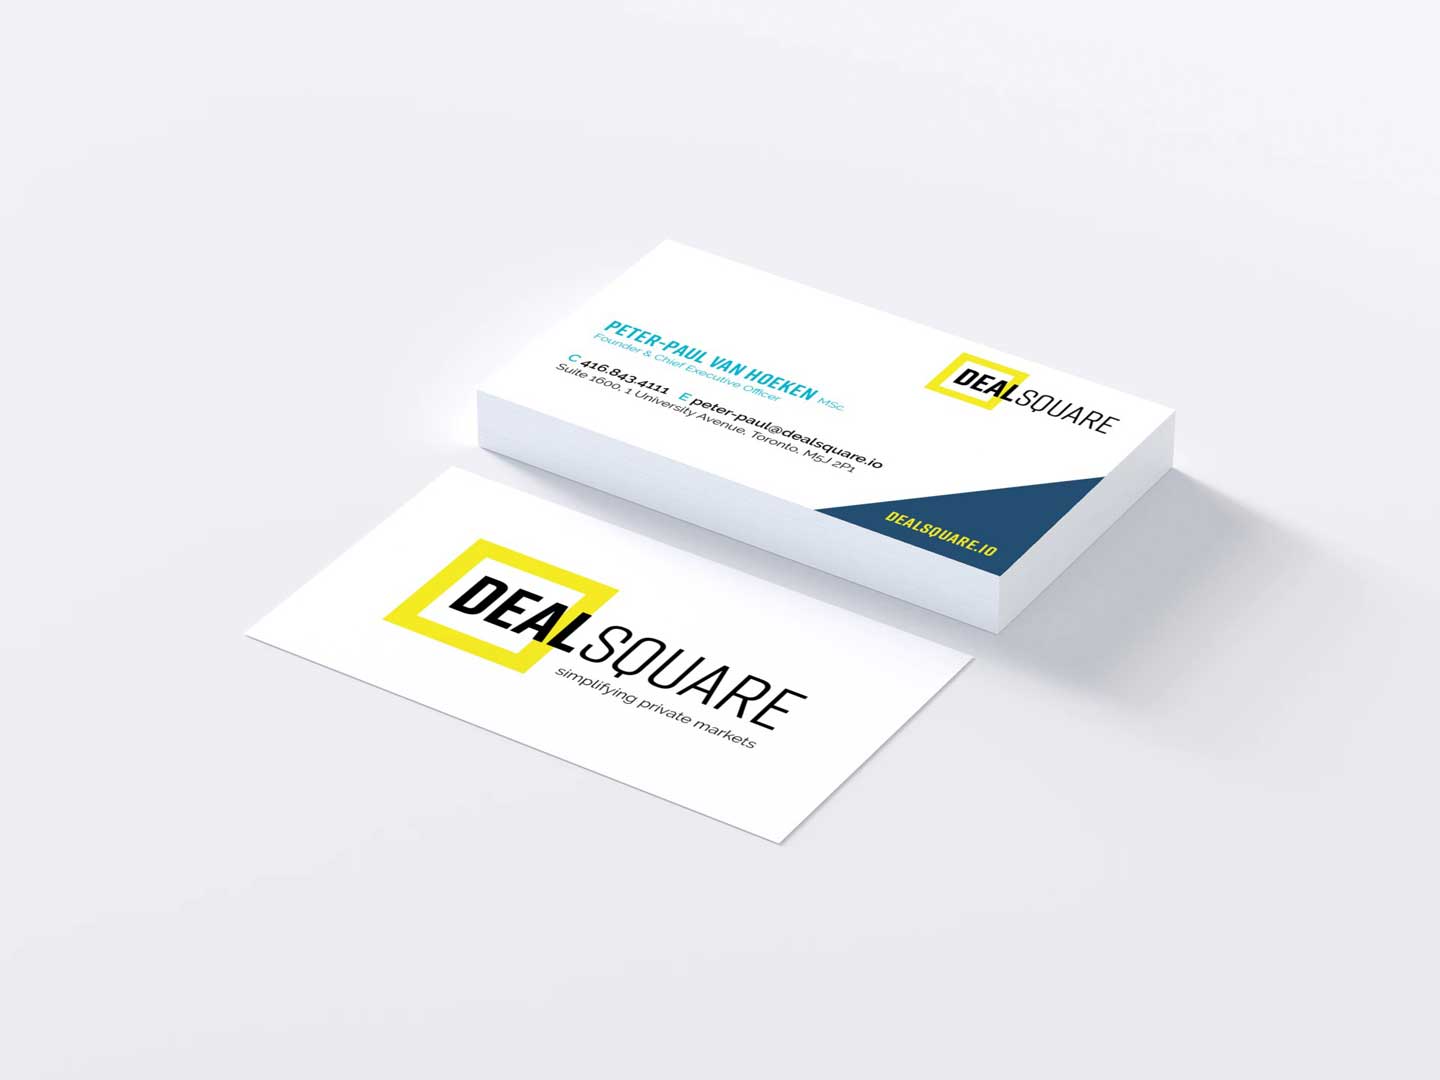 Deal Square business cards - White Canvas Design